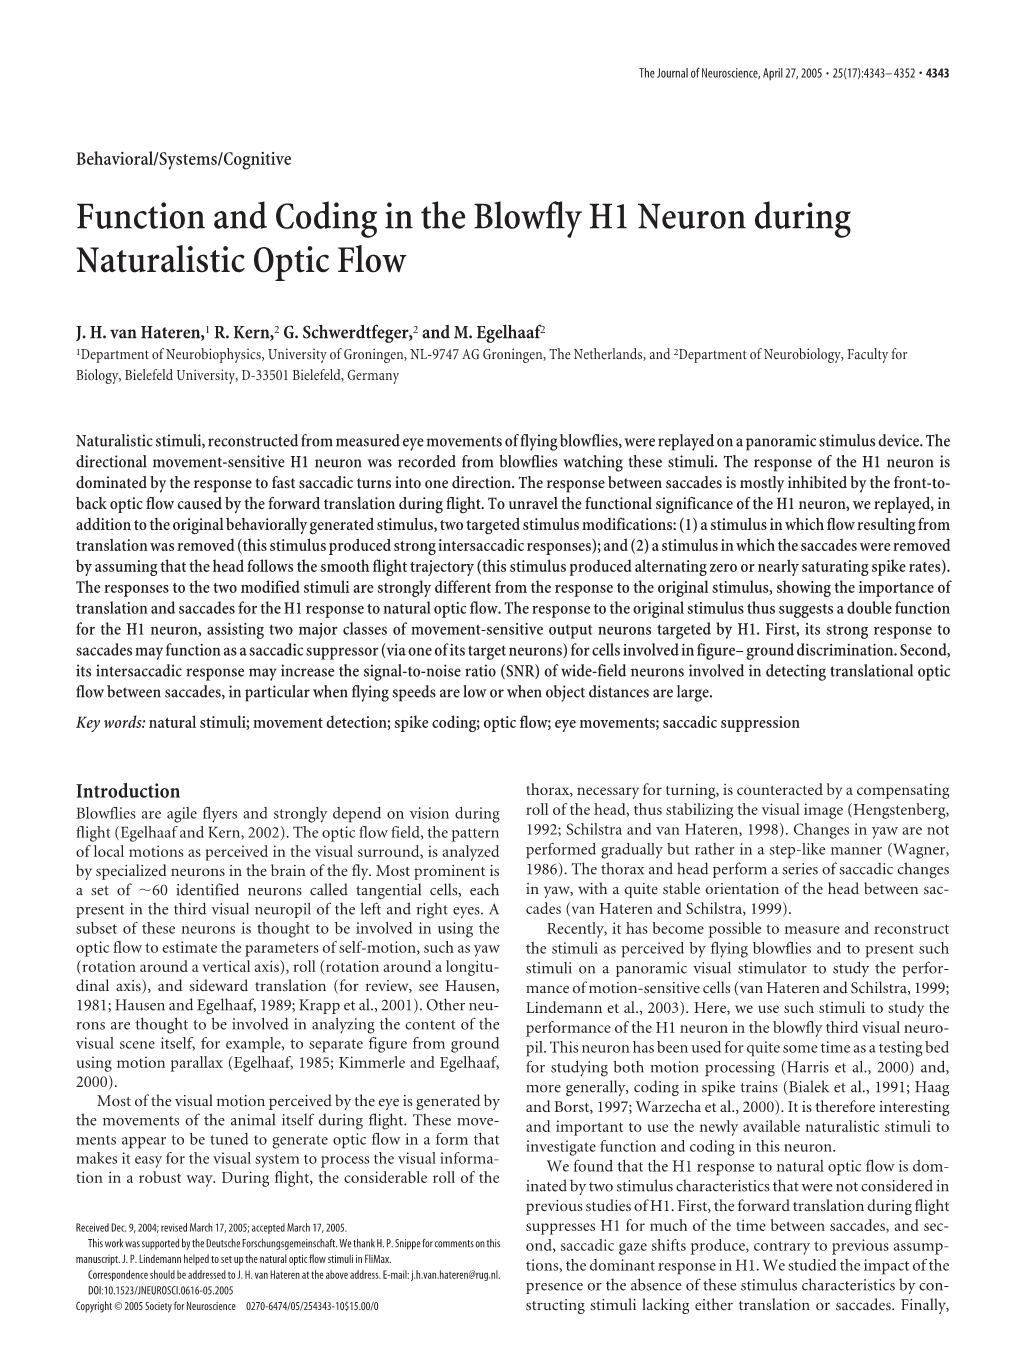 Function and Coding in the Blowfly H1 Neuron During Naturalistic Optic Flow